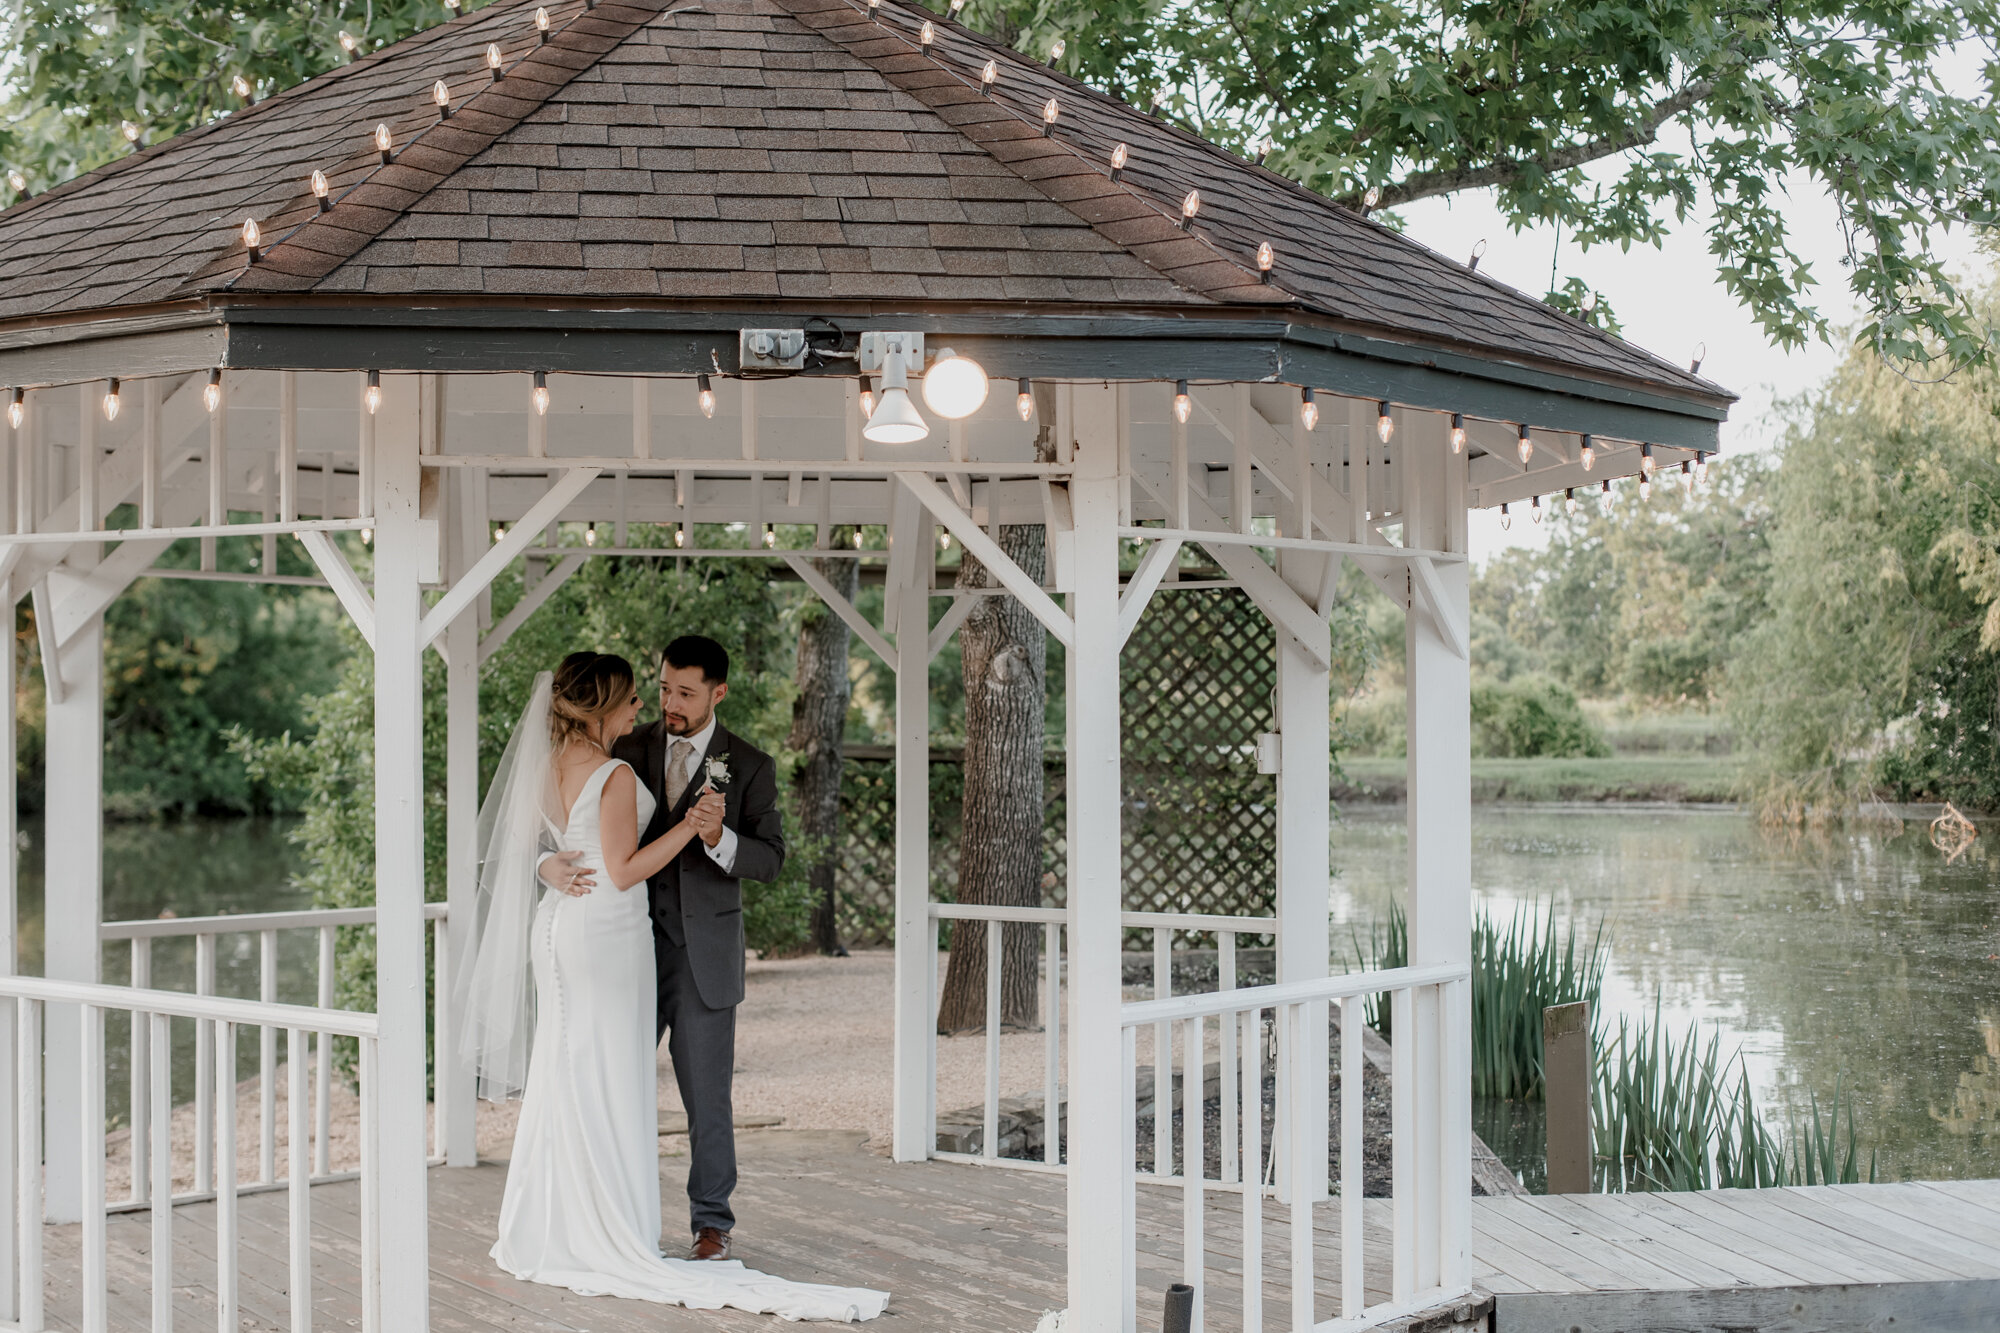 Bride and groom first dance in the gazebo. Glowing Wedding in Golden Champagne Tones at The Orchard at Caney Creek in Wharton, TX